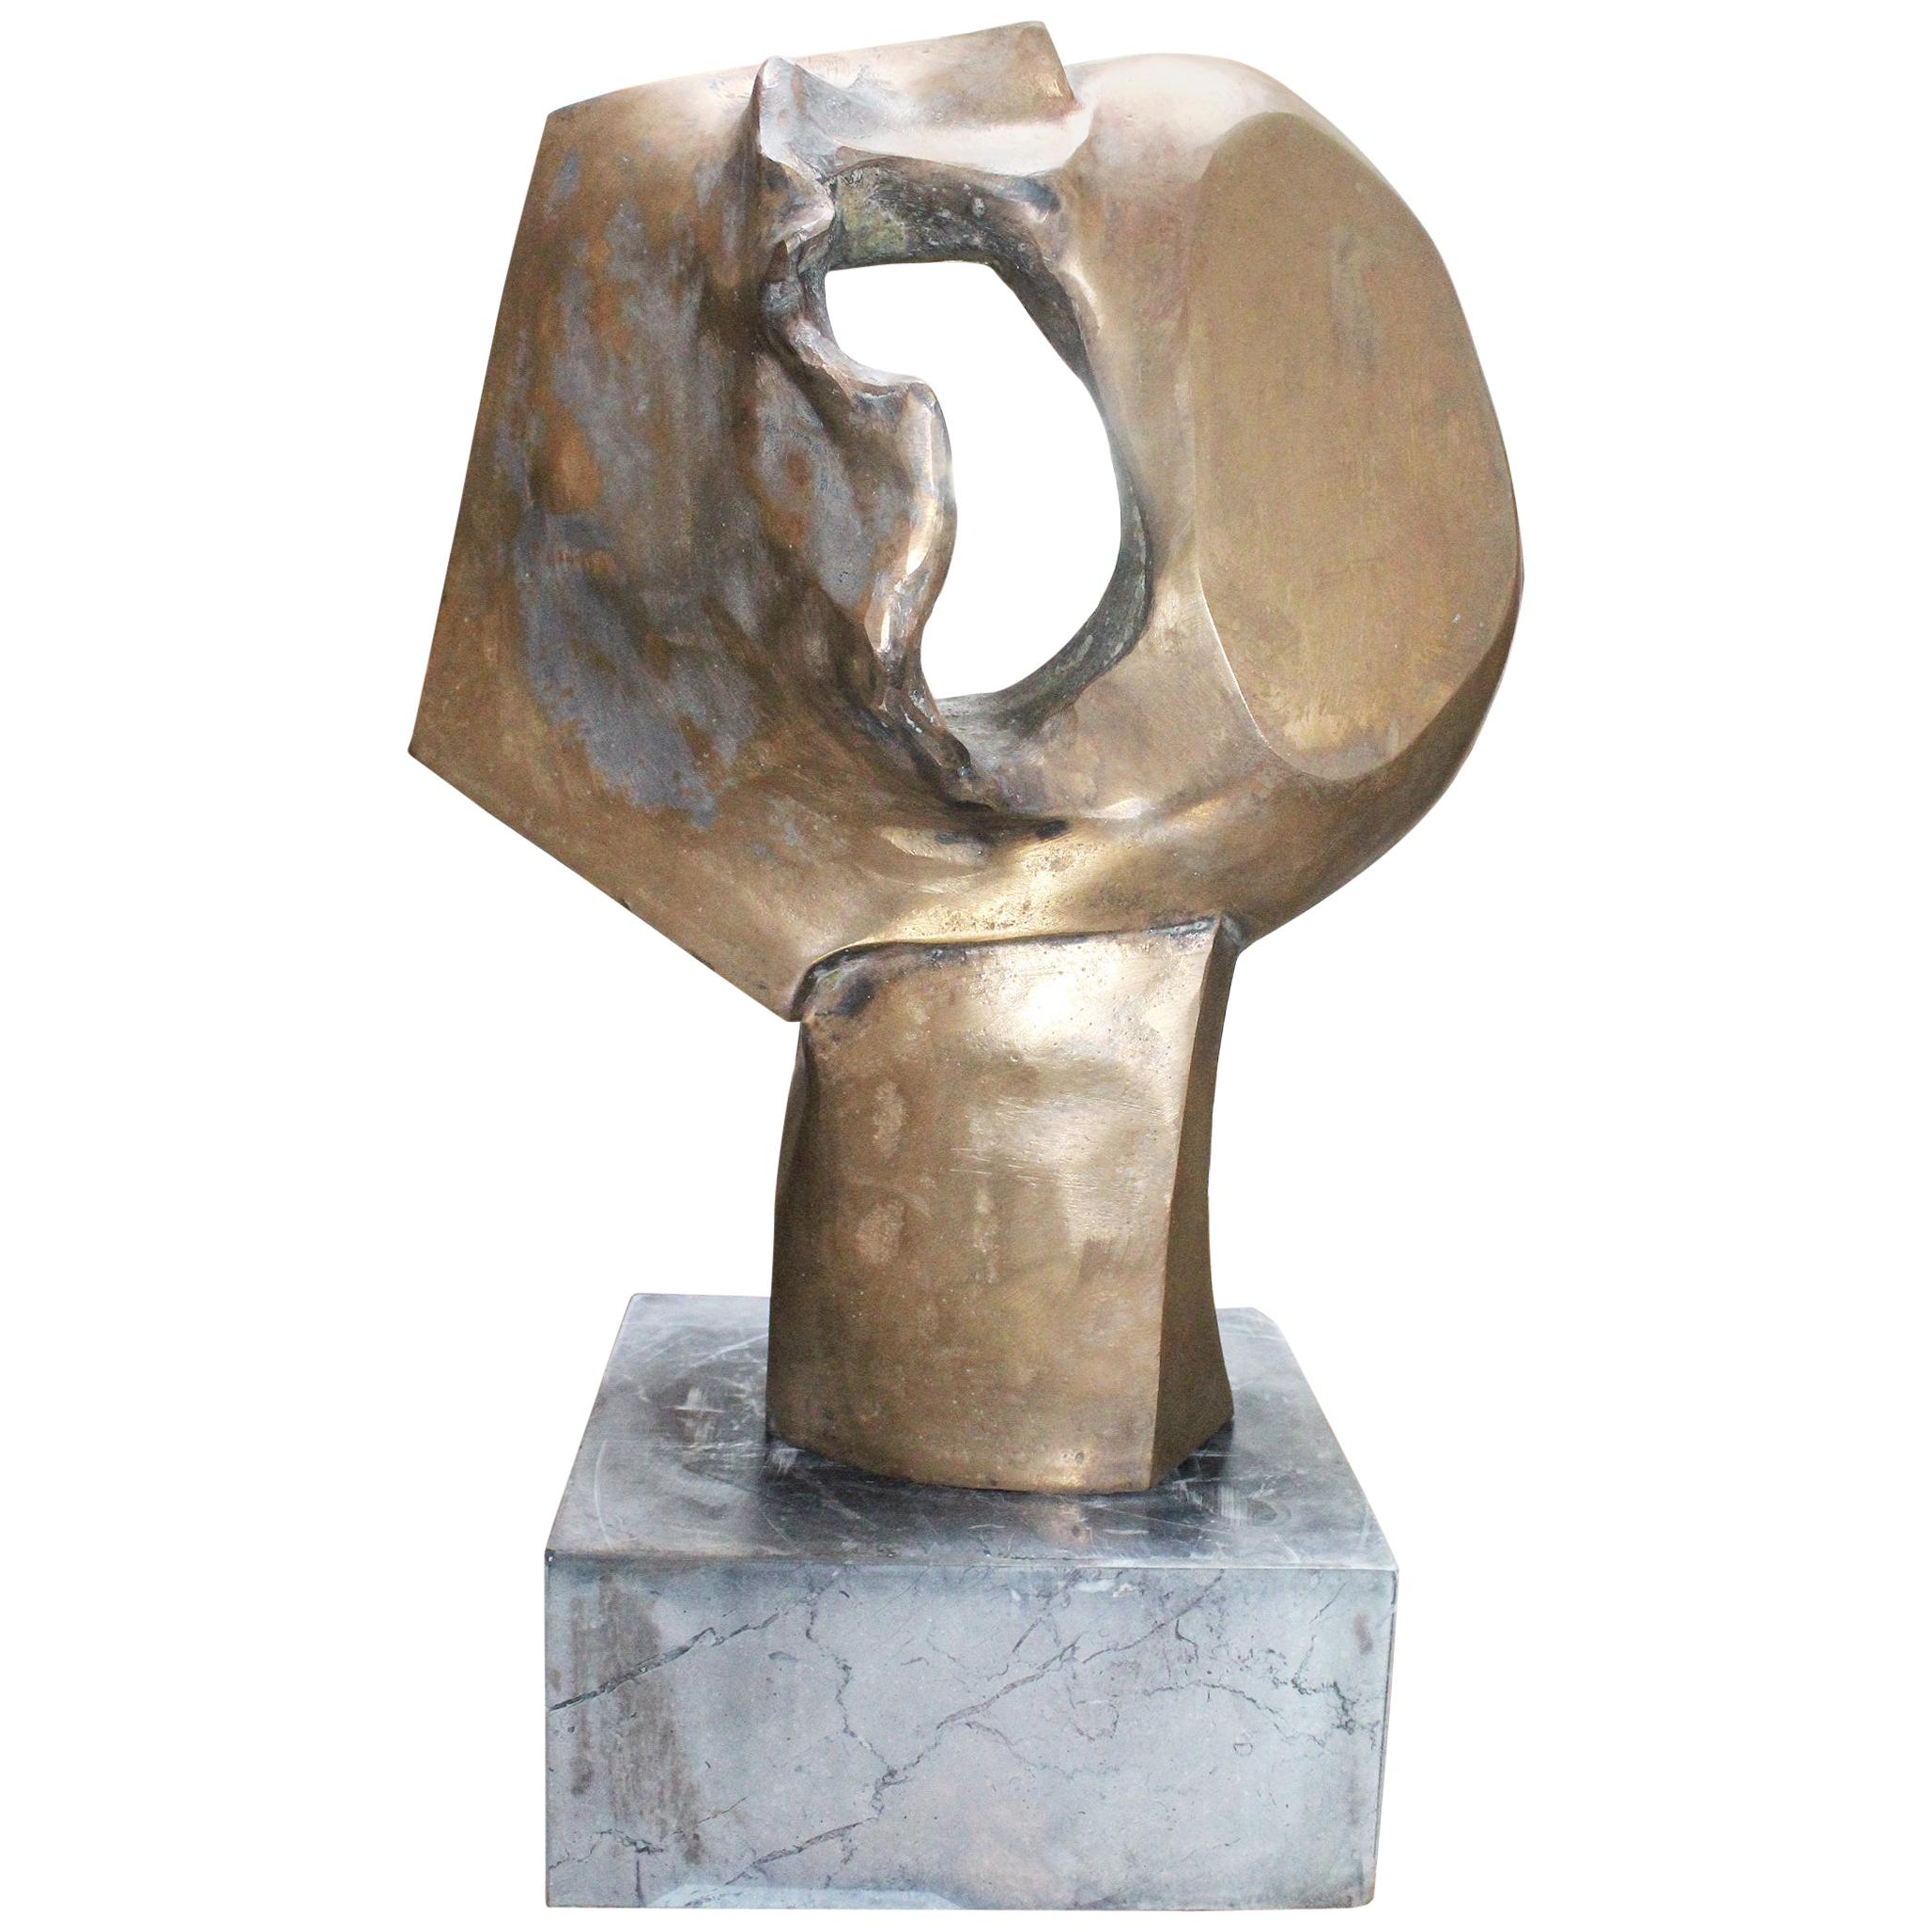 1960s Abstract Solid Bronze Sculpture Signed "K" Numbered 12 of 75